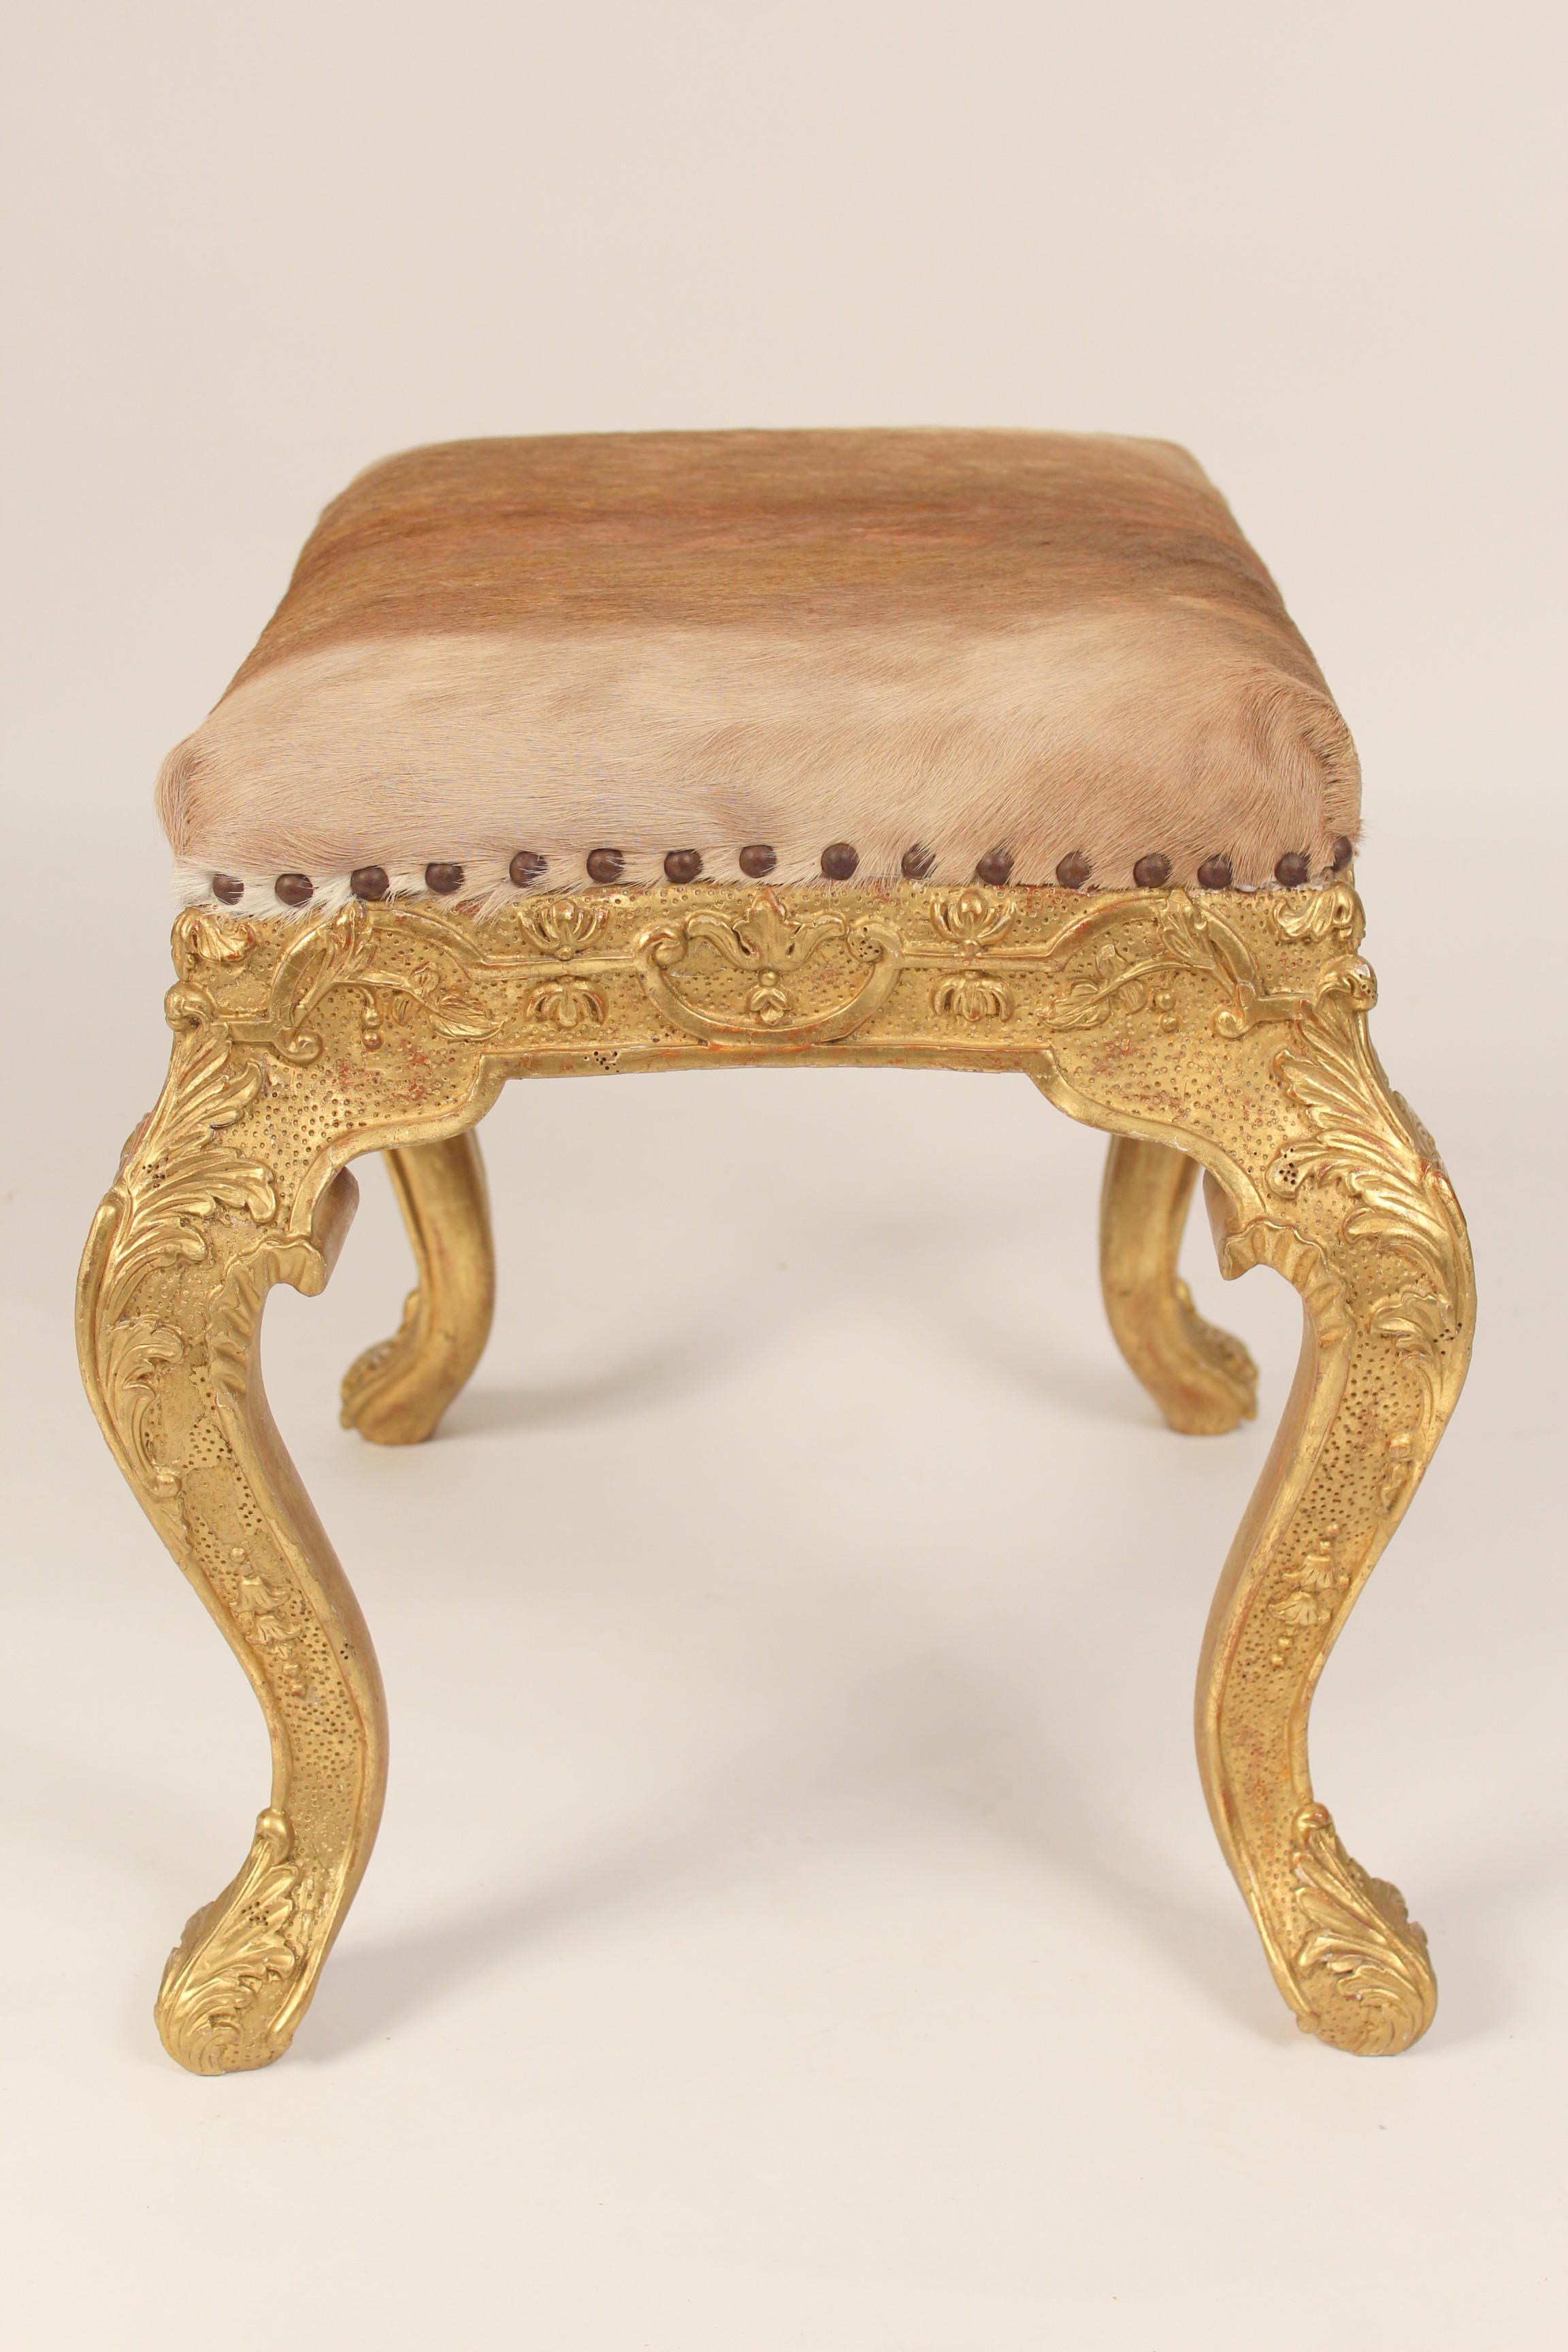 20th Century Pair of Louis XV Style Gilt Wood Benches